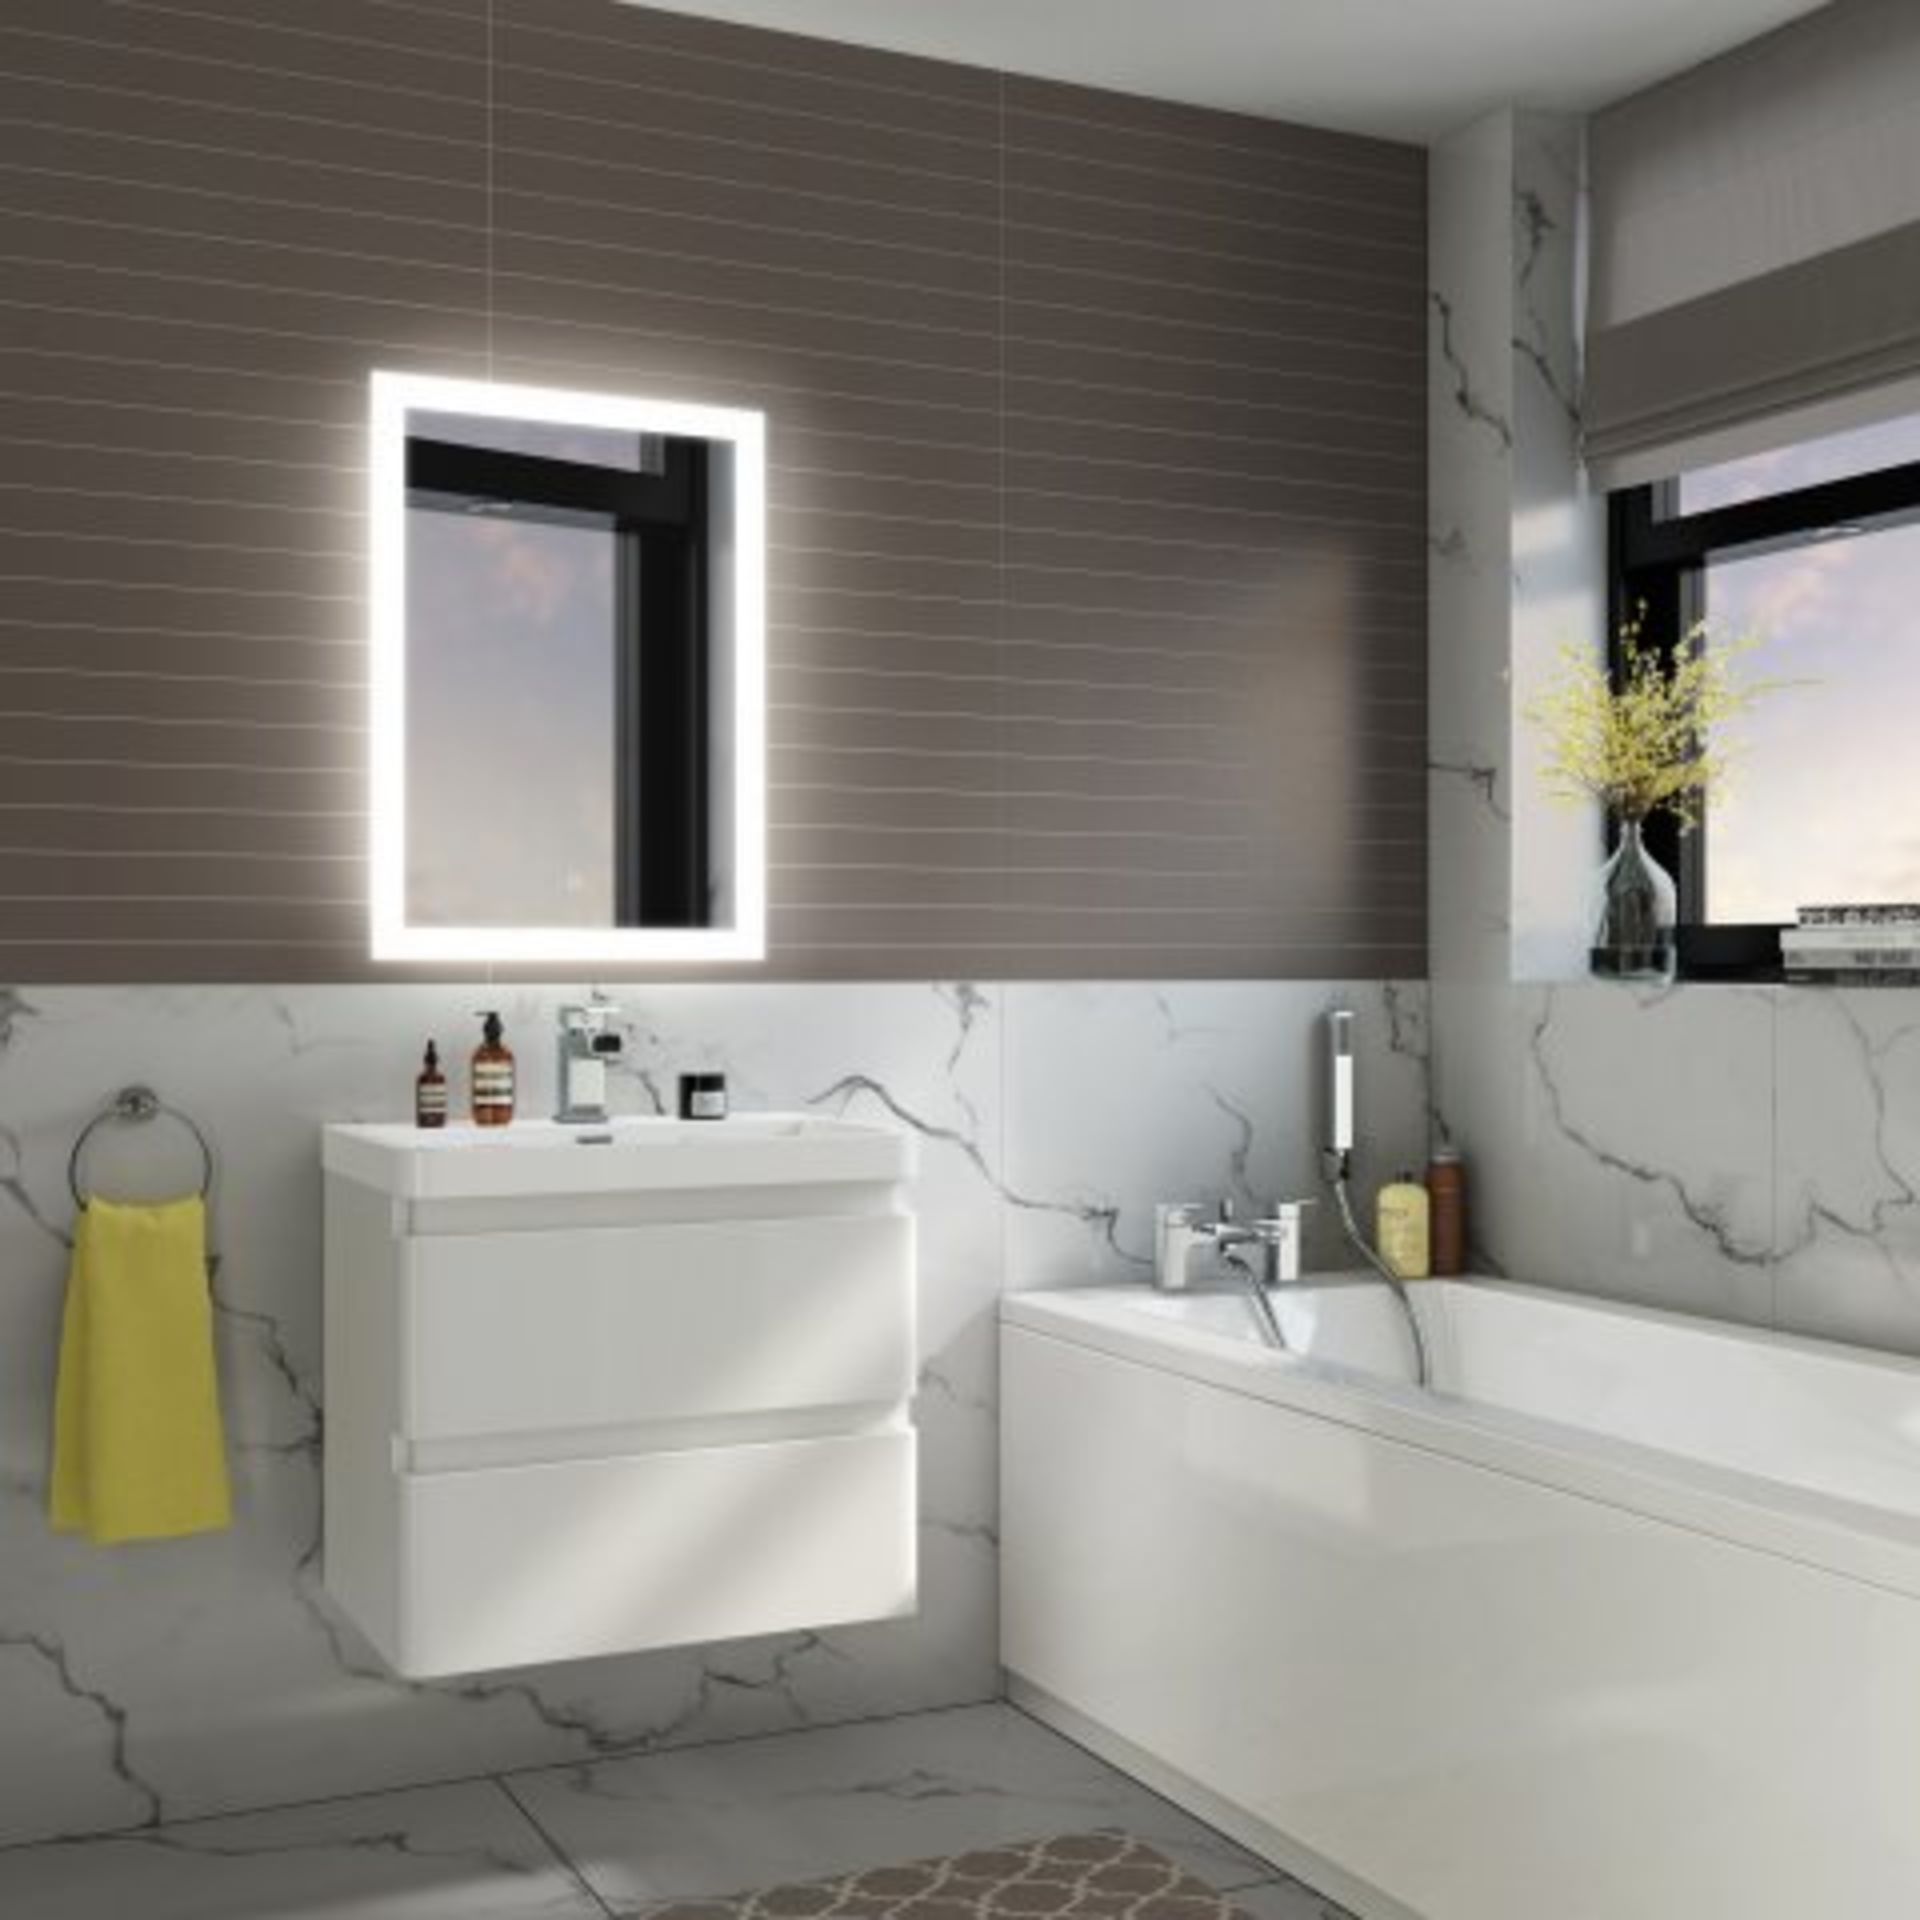 (138) 700x500mm Orion Illuminated LED Mirror - Switch Control. RRP £349.99. Light up your bathroom - Image 3 of 3